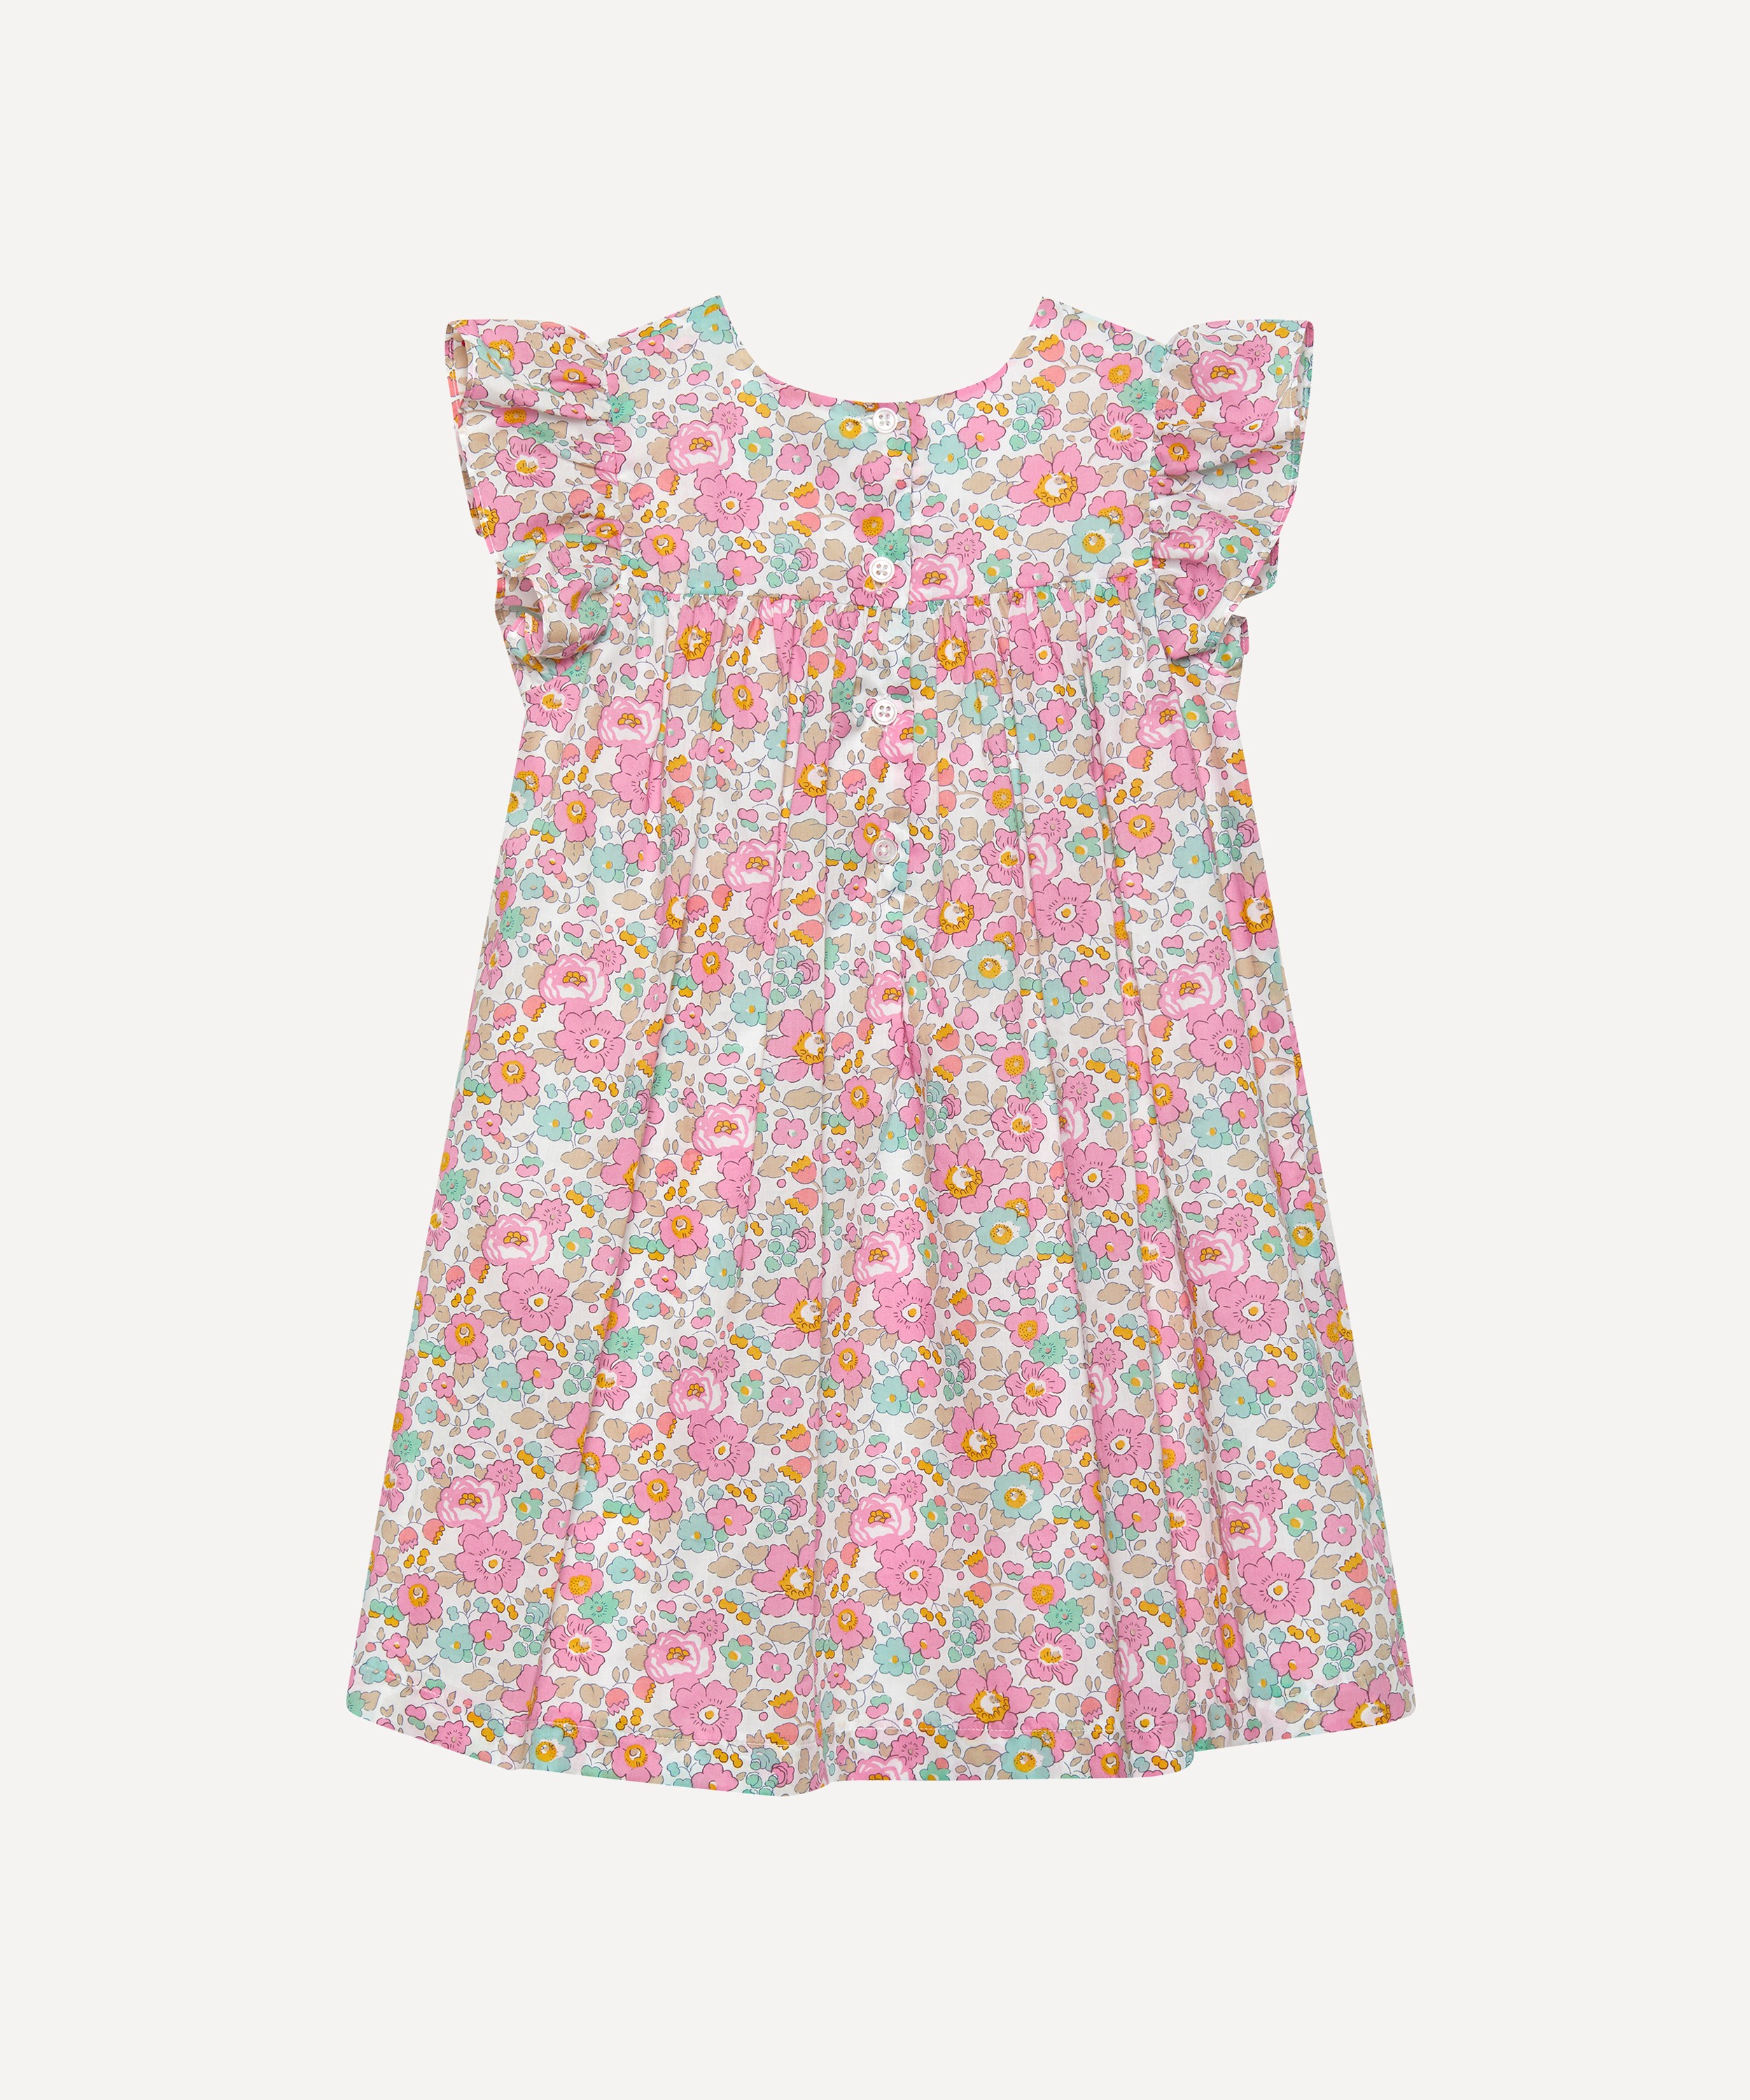 Trotters - Betsy Ruffle Dress 8-11 Years image number 1